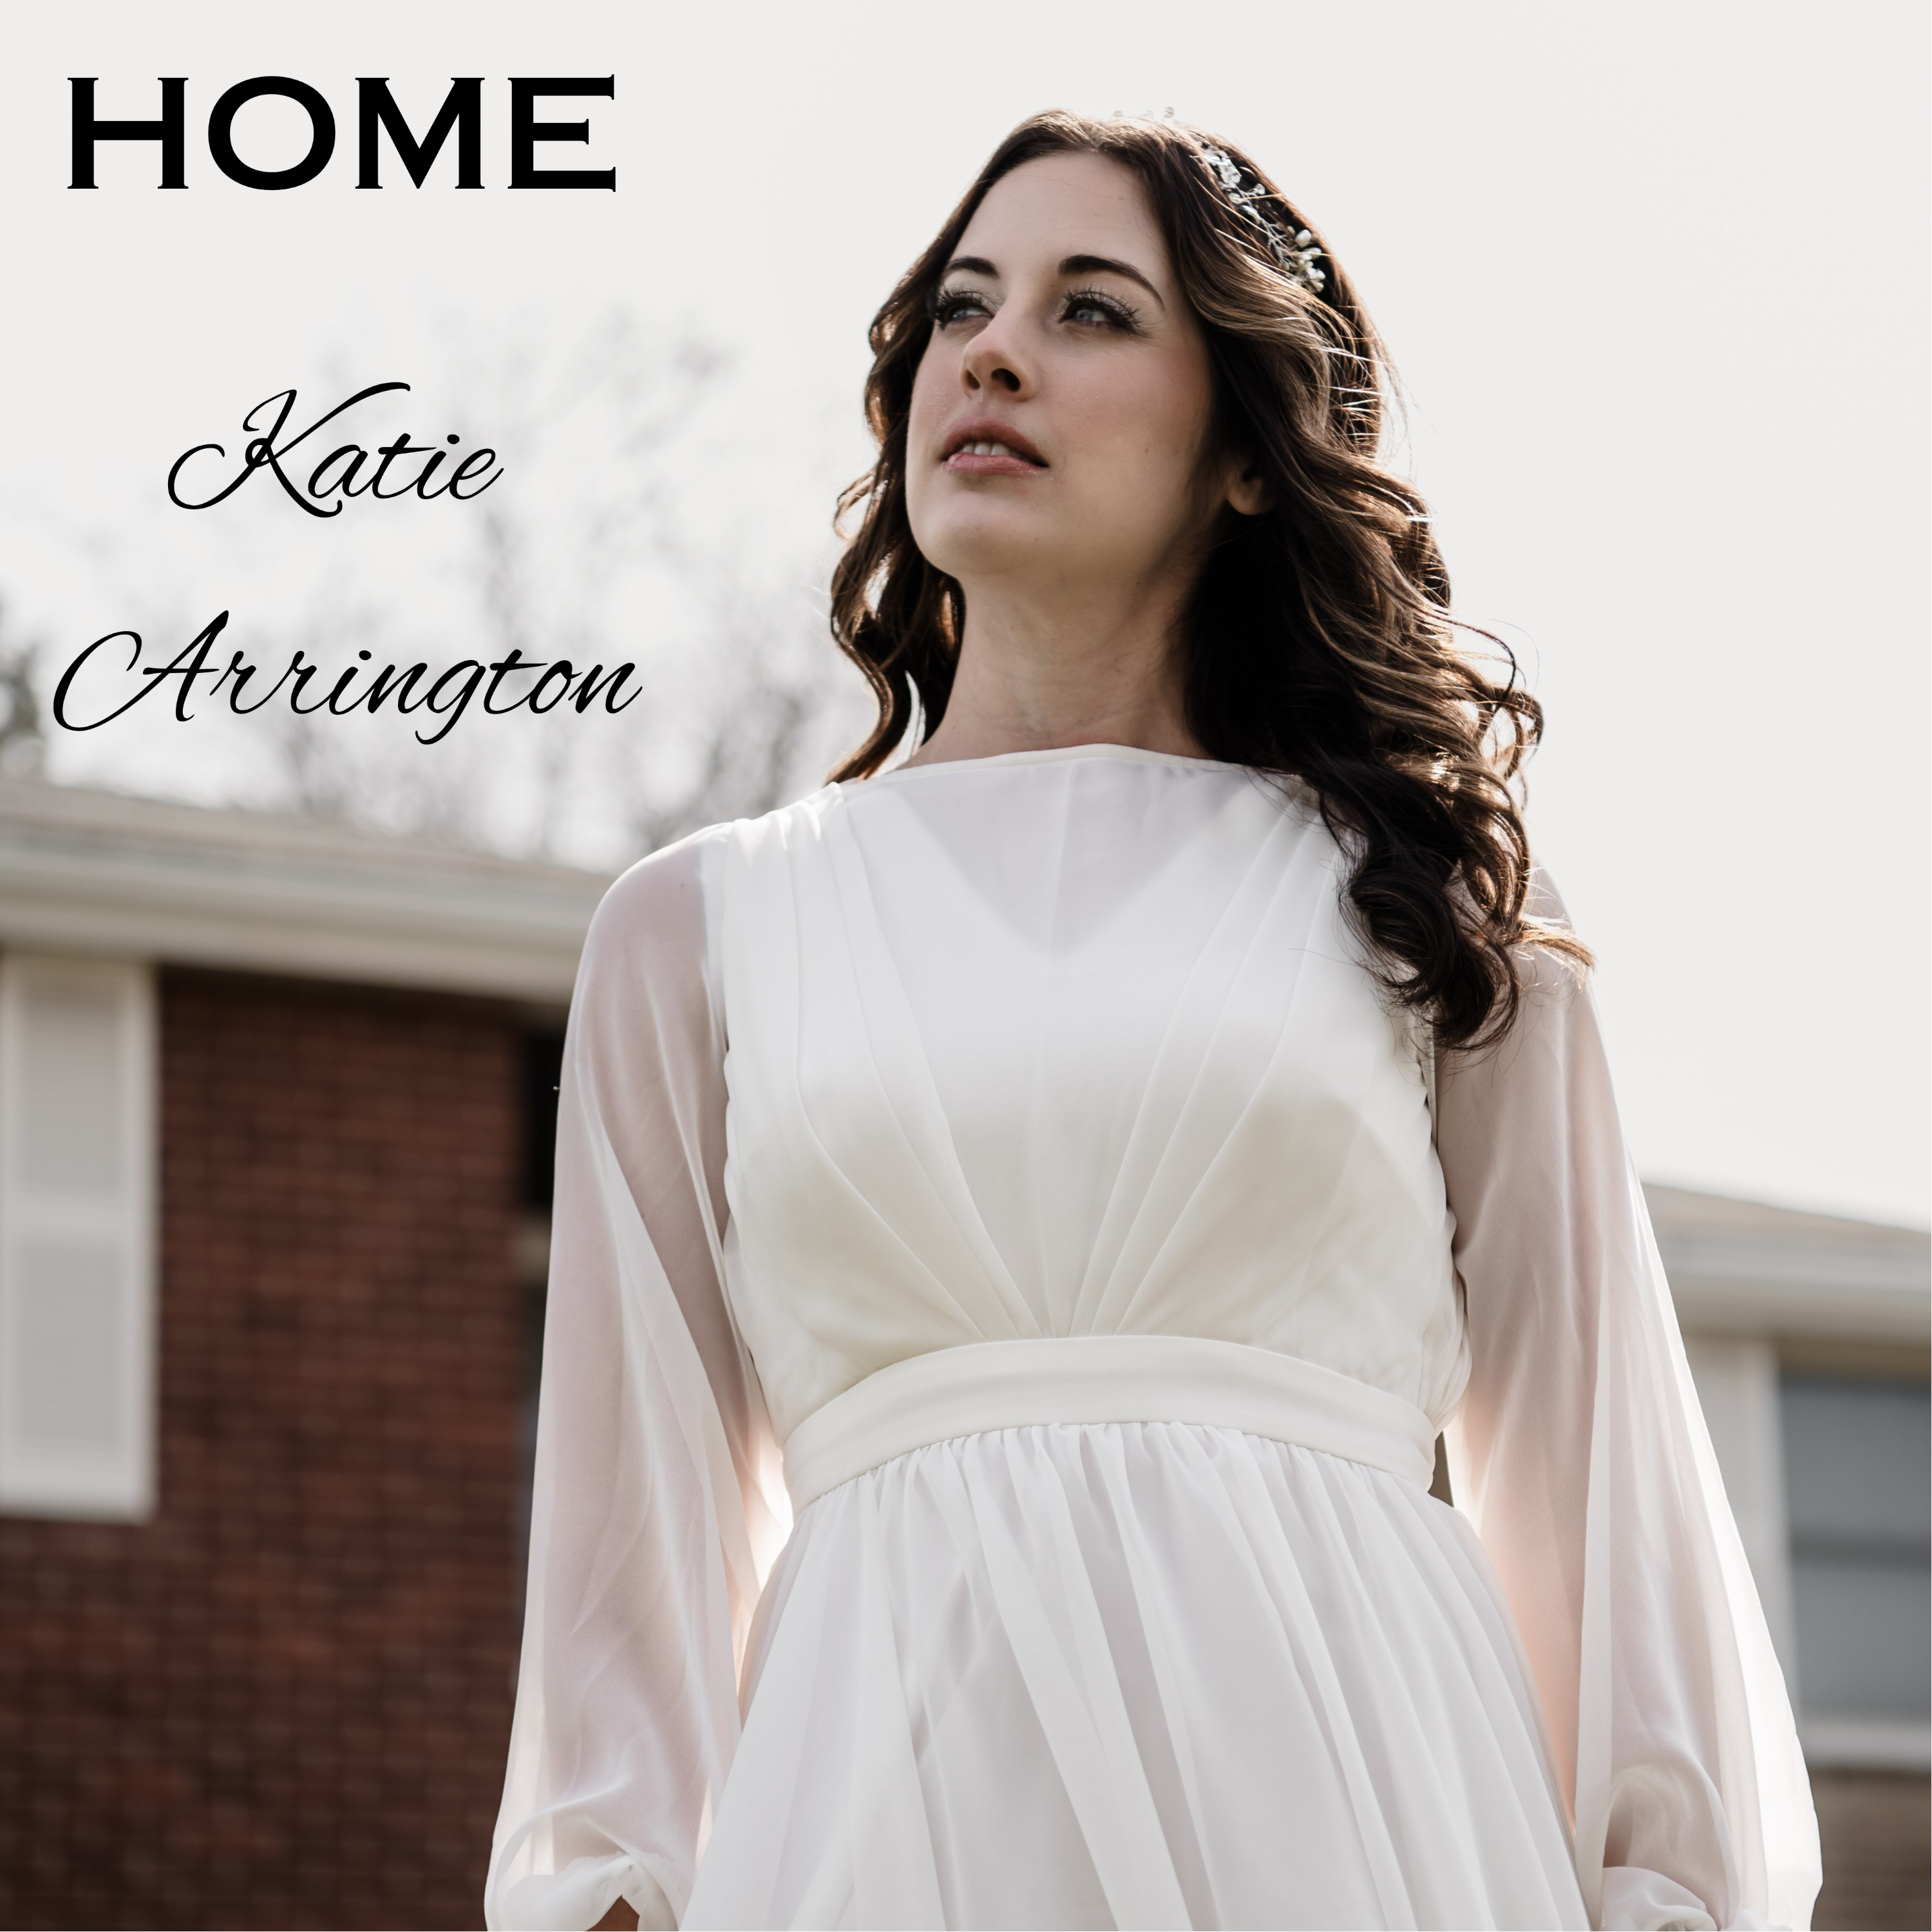 Katie Arrington: Your song "Home" was in collaboration with Foster Love Project about foster care?